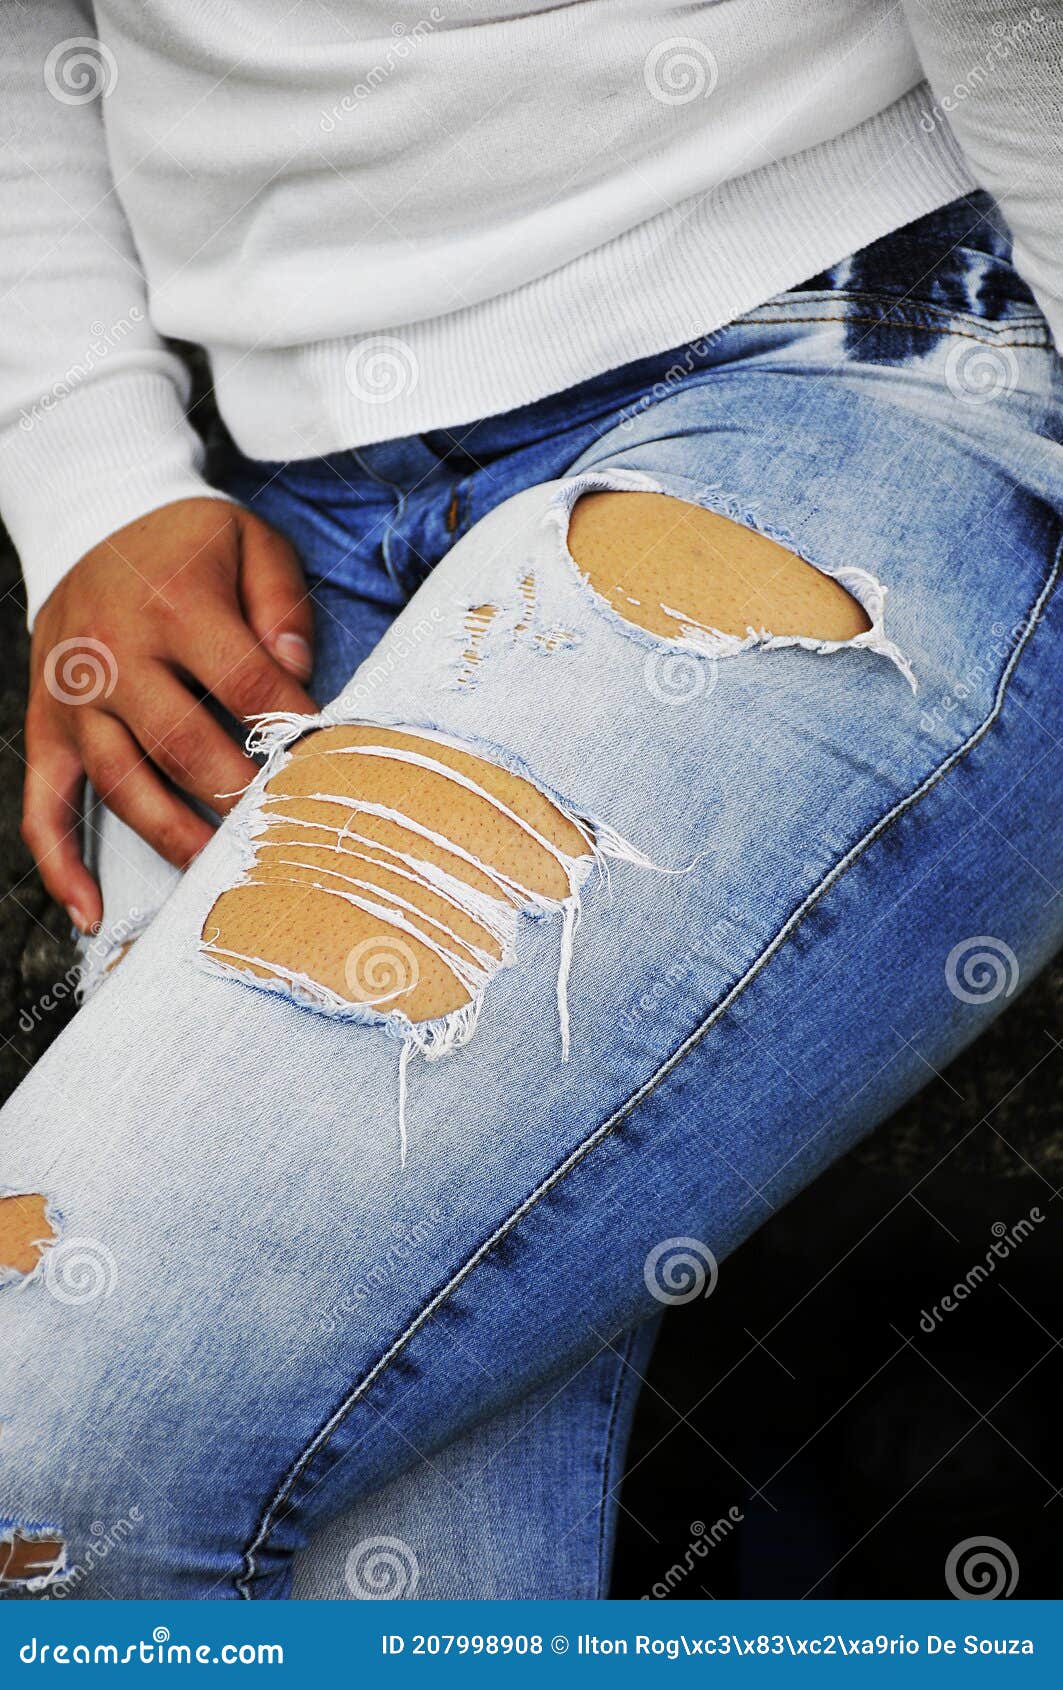 Ripped jeans stock photo. Image of closeup, modern, nice - 207998908